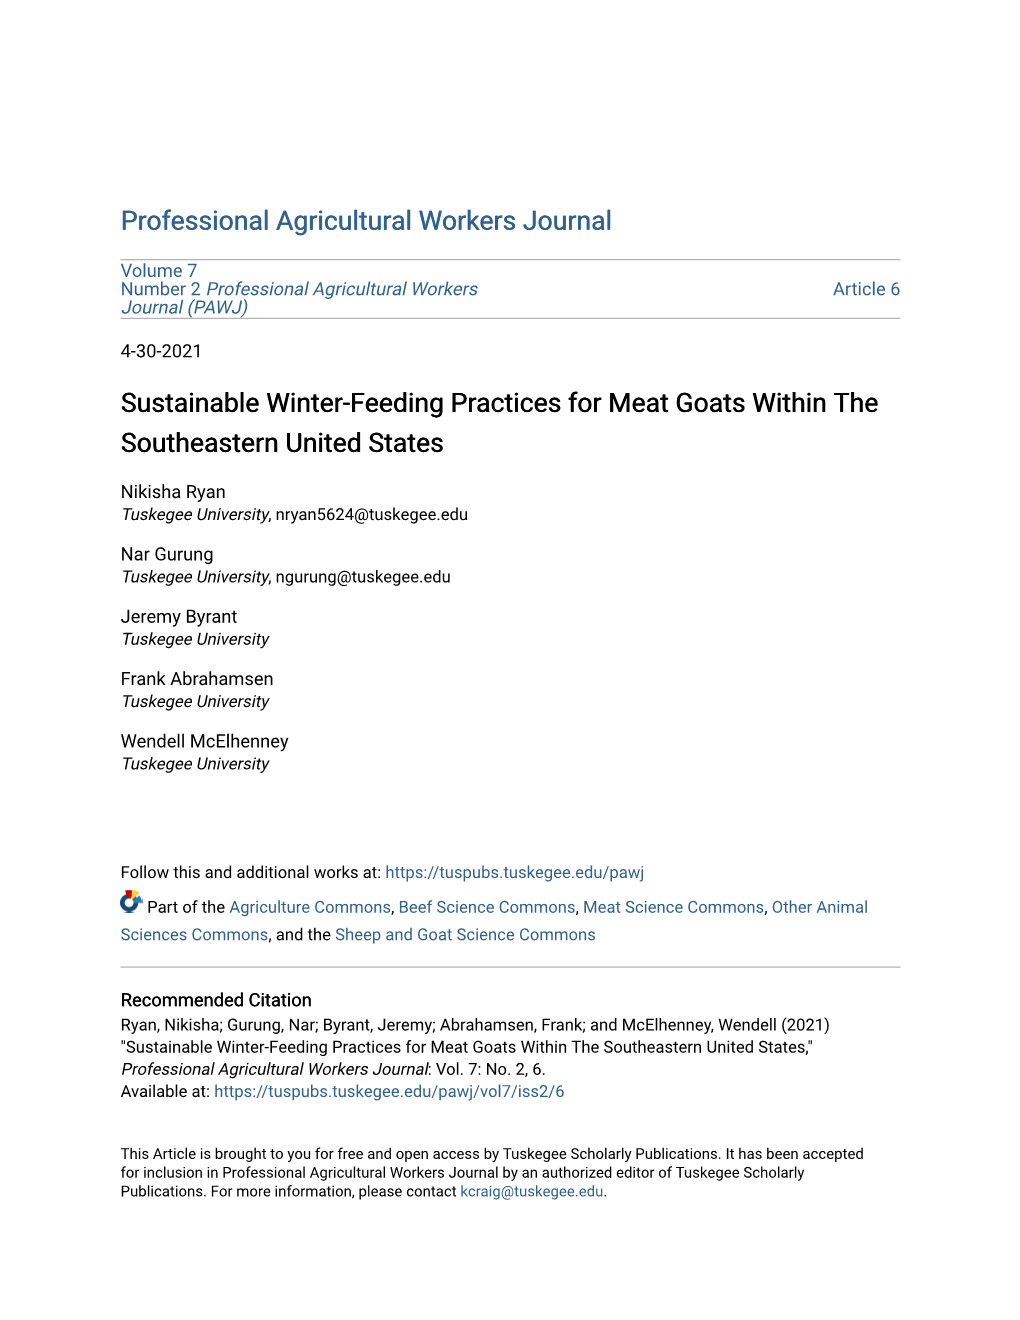 Sustainable Winter-Feeding Practices for Meat Goats Within the Southeastern United States